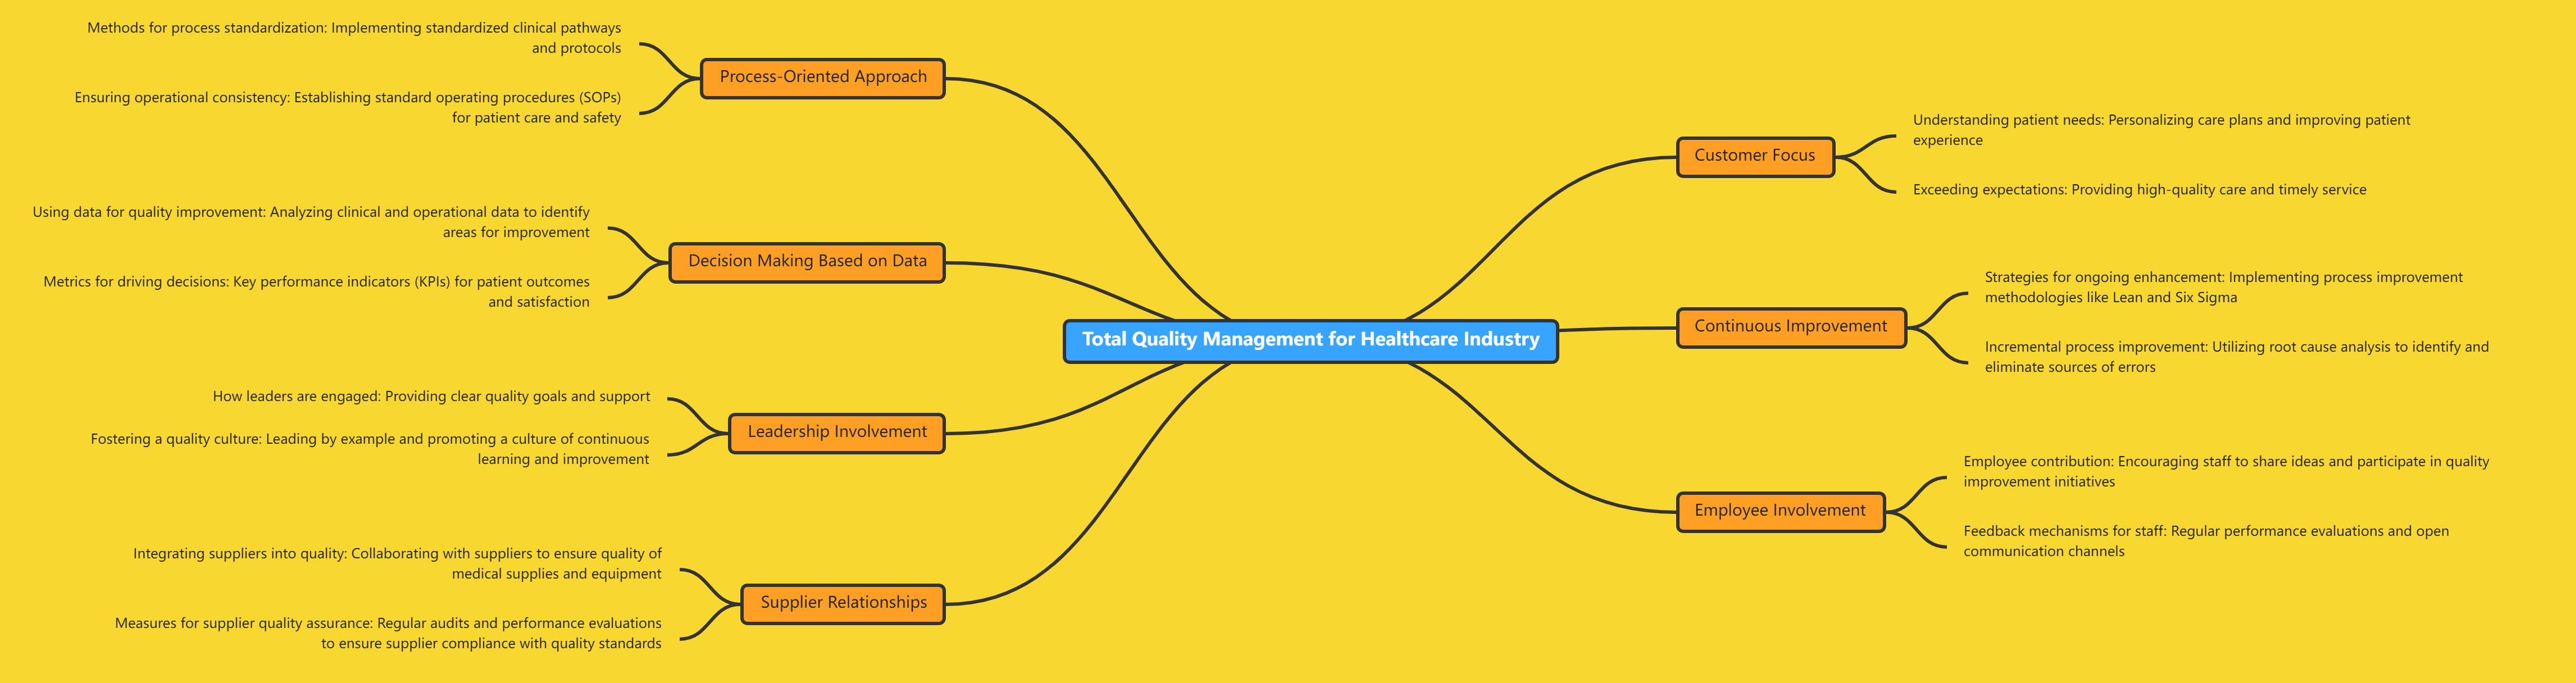 Total Quality Management For Healthcare Industry 